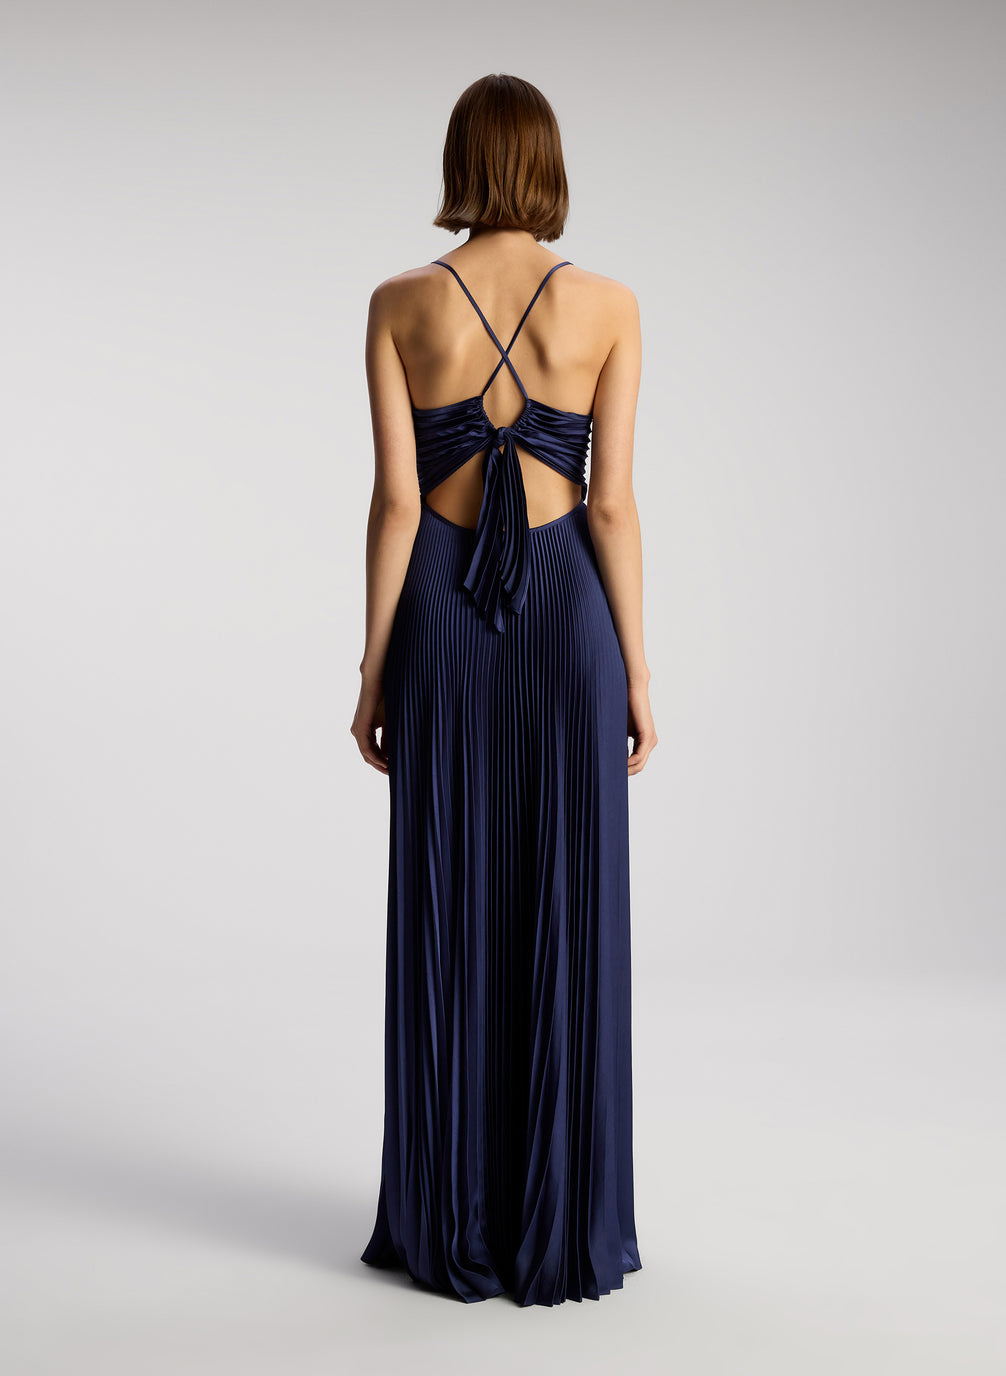 back view of woman wearing navy blue pleated maxi dress